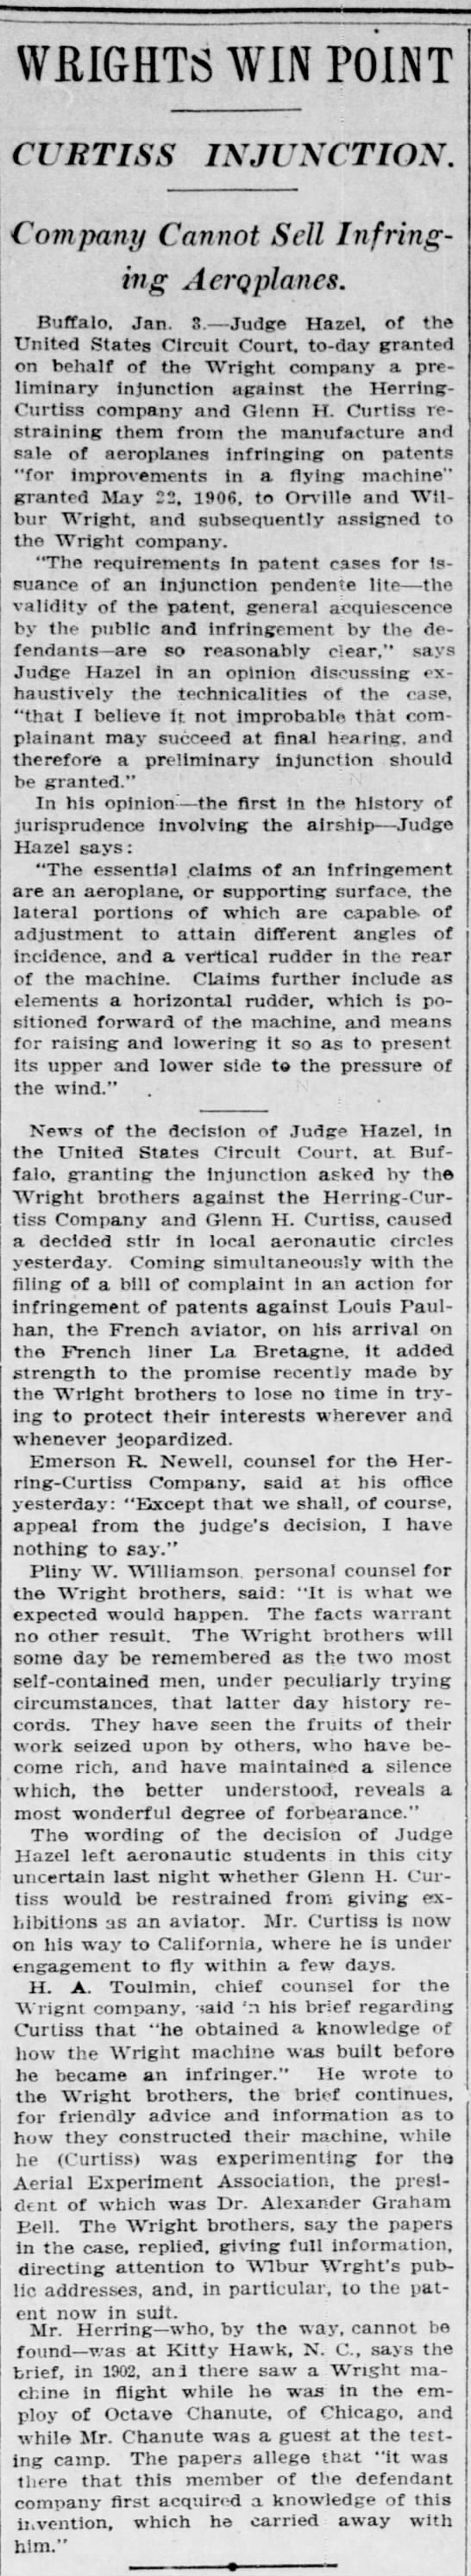 Wright Brothers win injunction against Herring-Curtiss Company in Jan 1910 for patent infringement - 